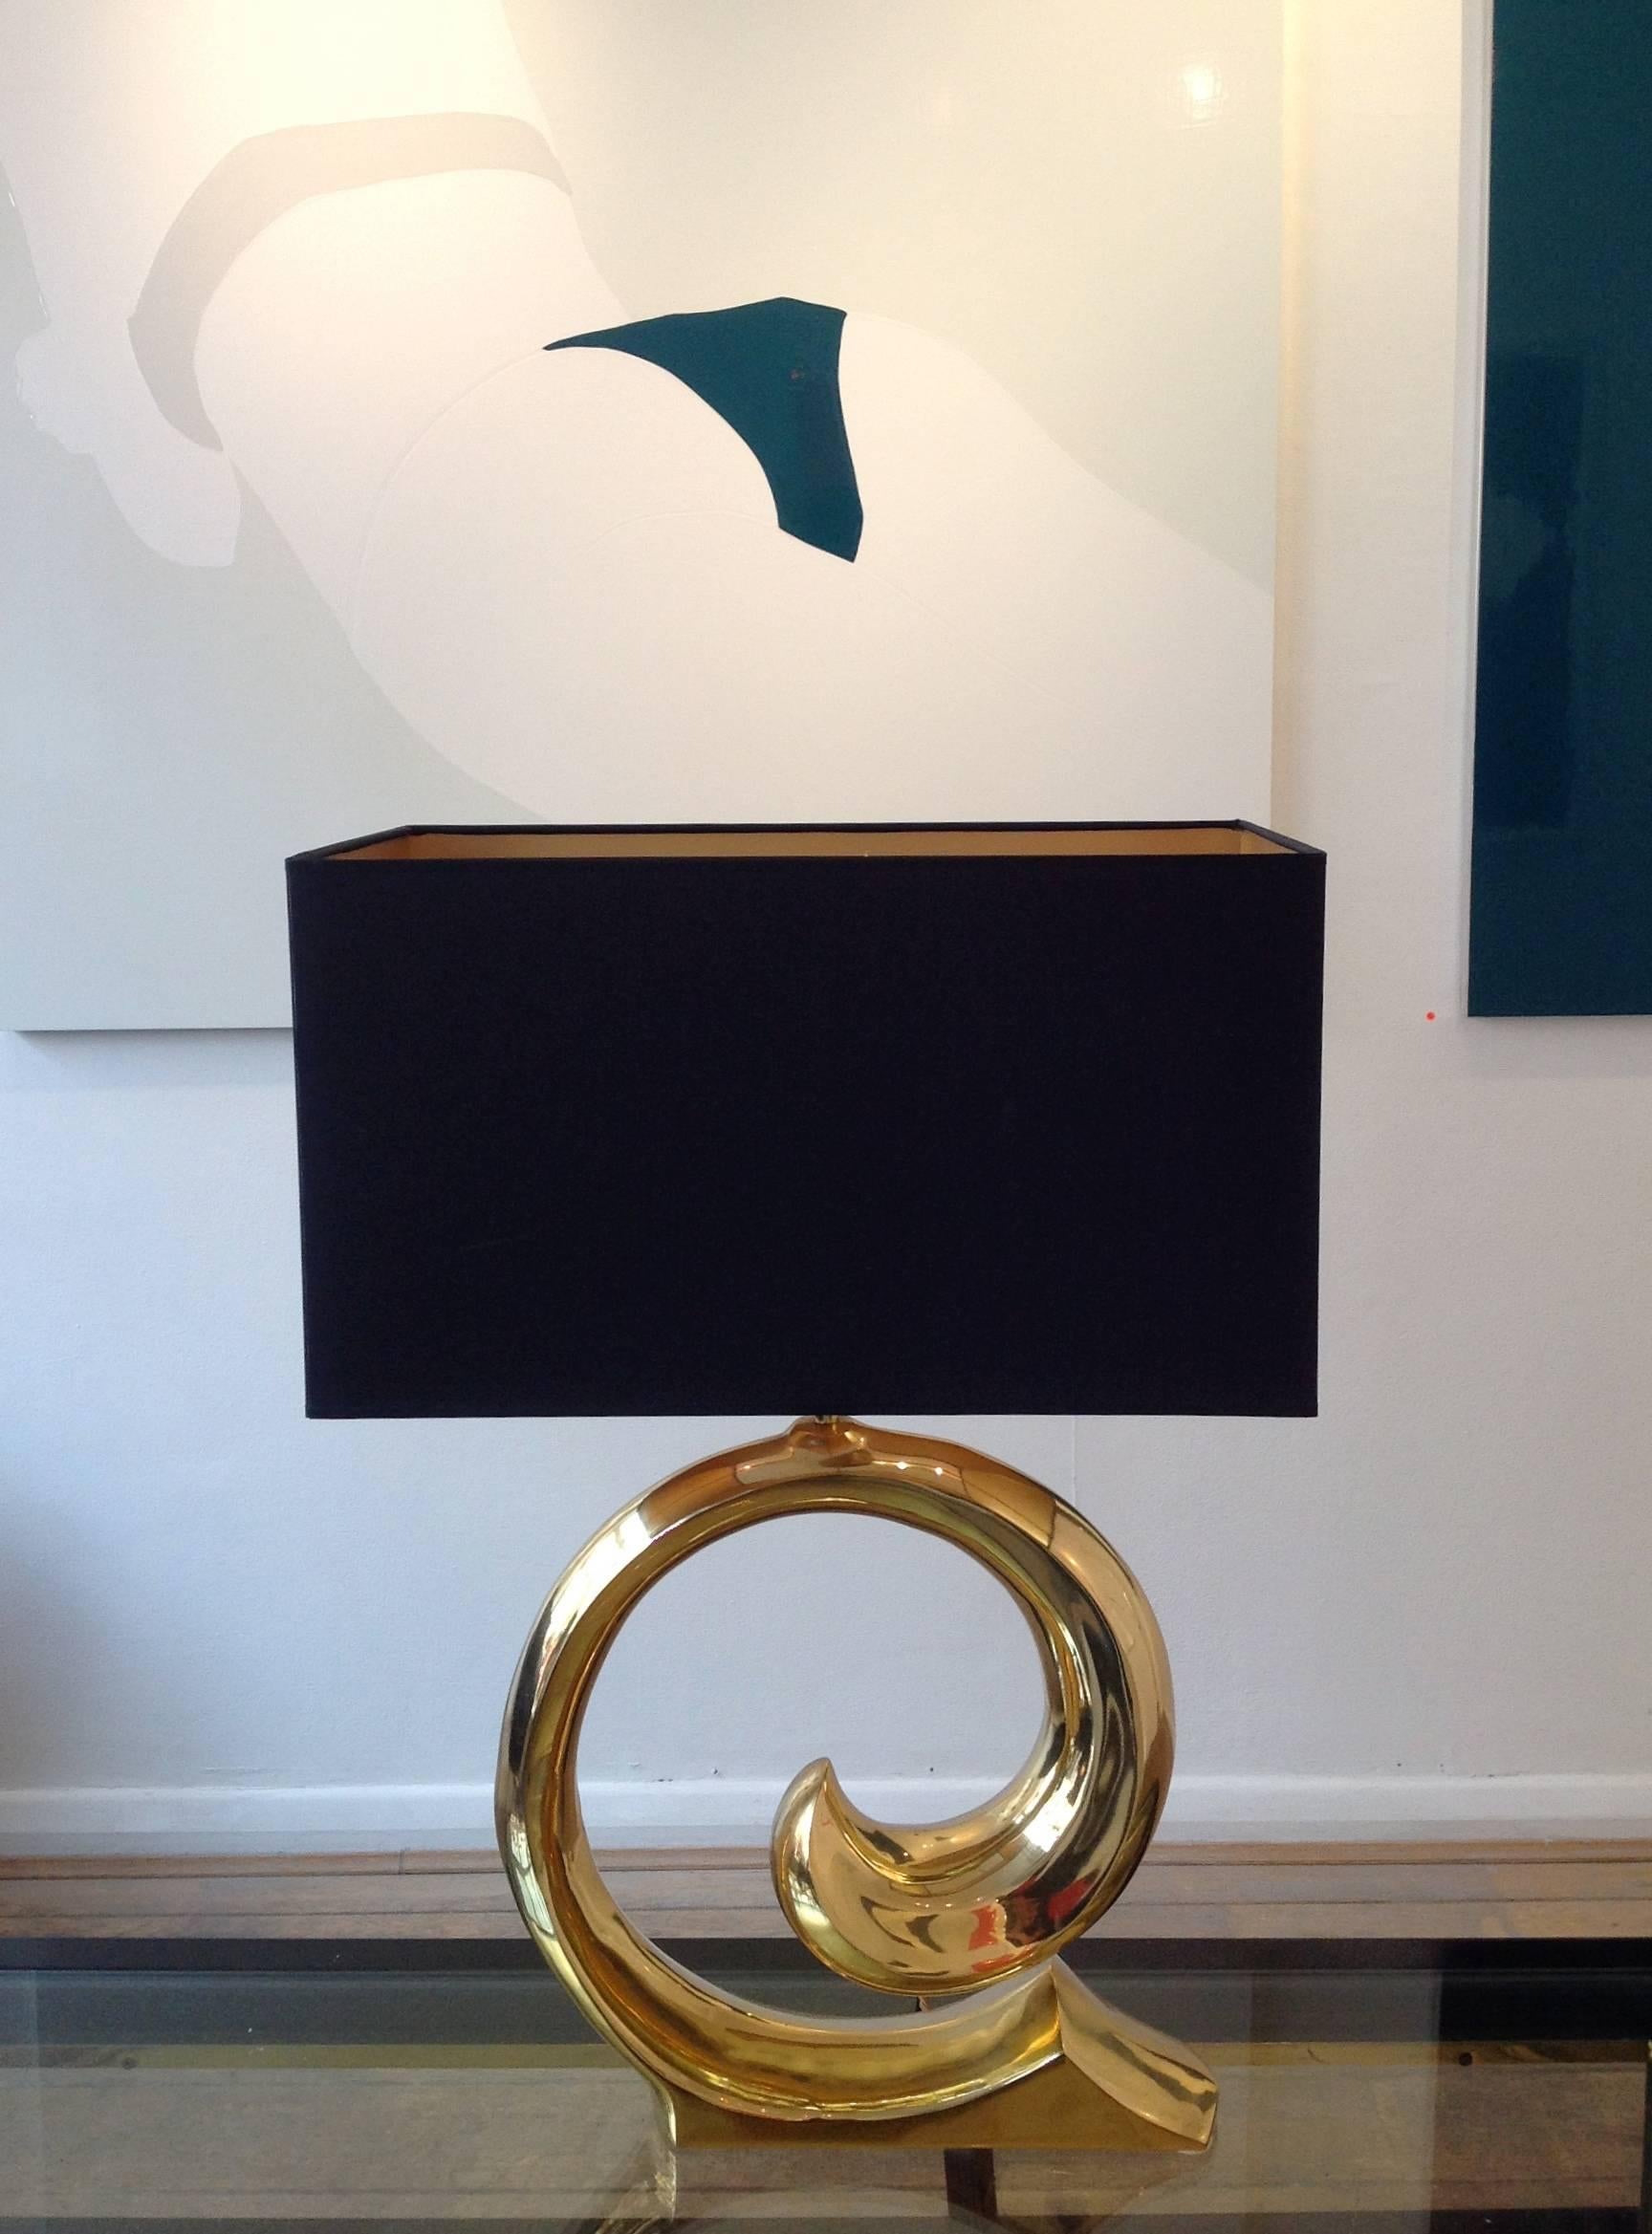 A pair of large Pierre Cardin lamps, moulded in brass after the Pierre Cardin swirling logo. With bespoke, new, black, rectangular shades with gold interiors.
Re wired with antique black flex and PAT tested for UK fittings.